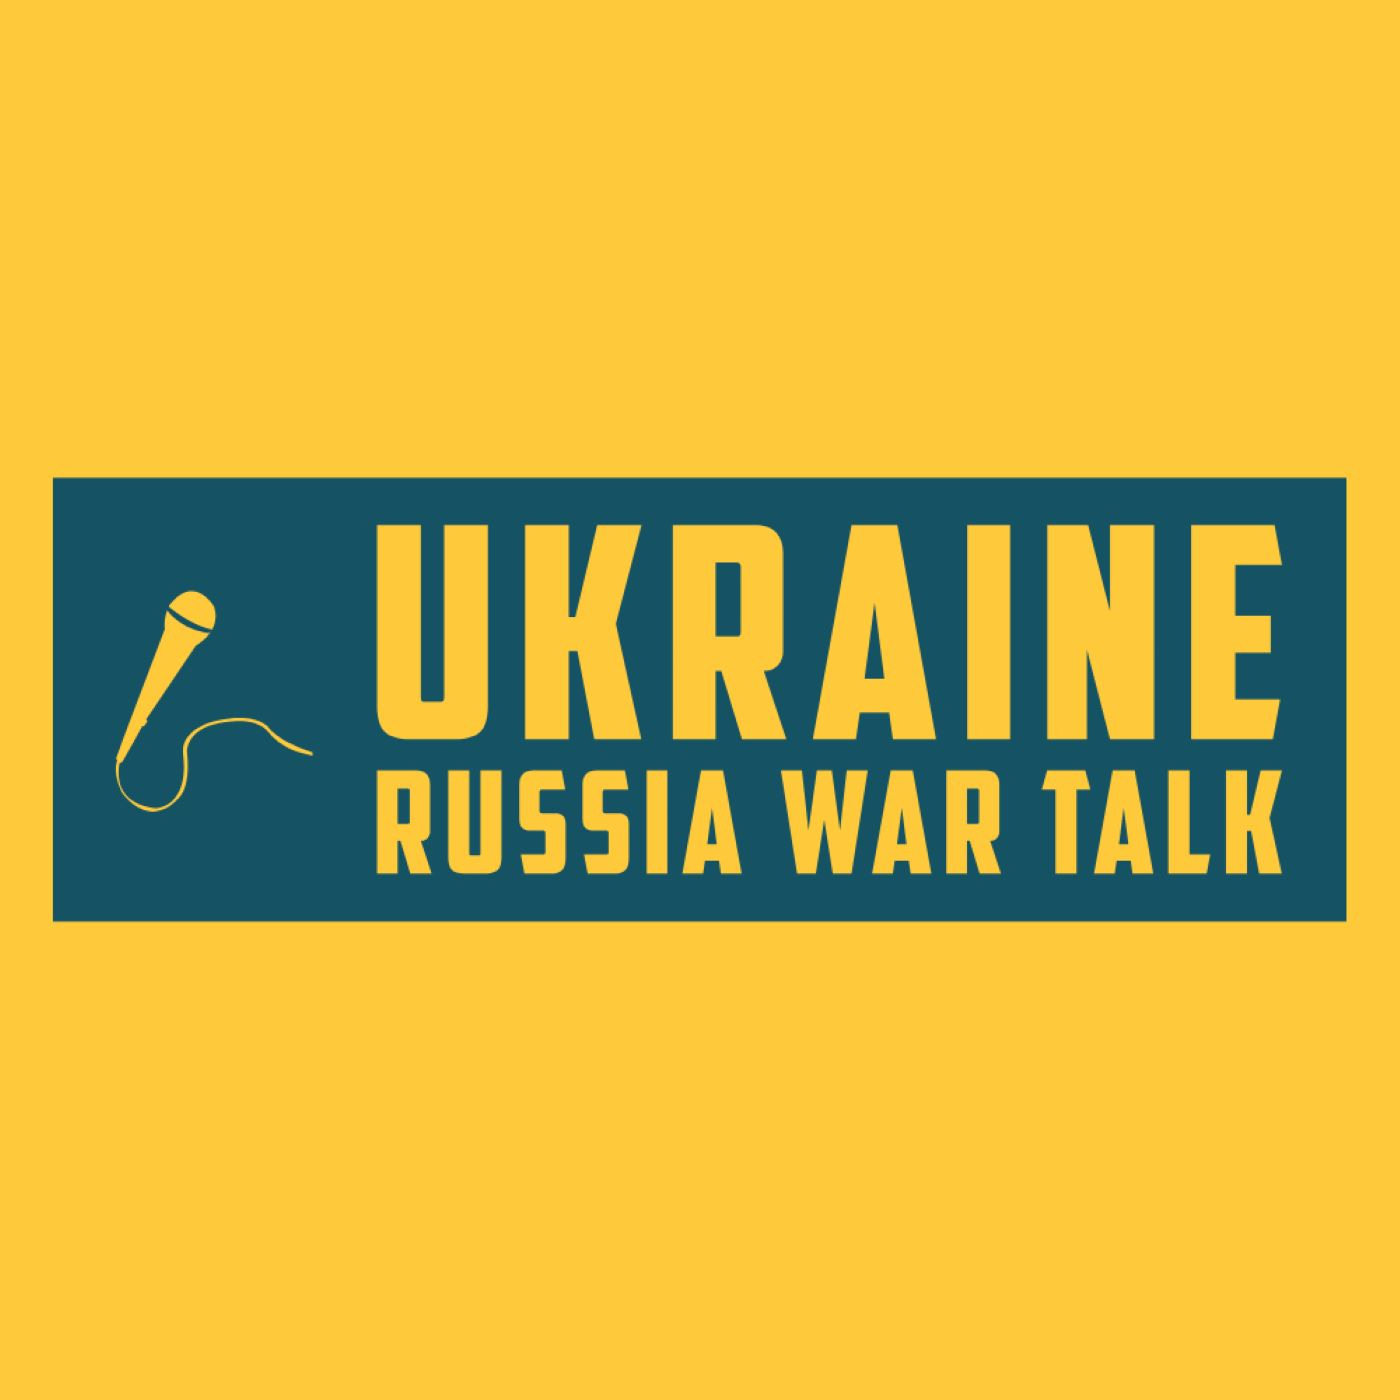 Episode 8: Command Crisis, the state of the war, Americans telling Ukraine what to do